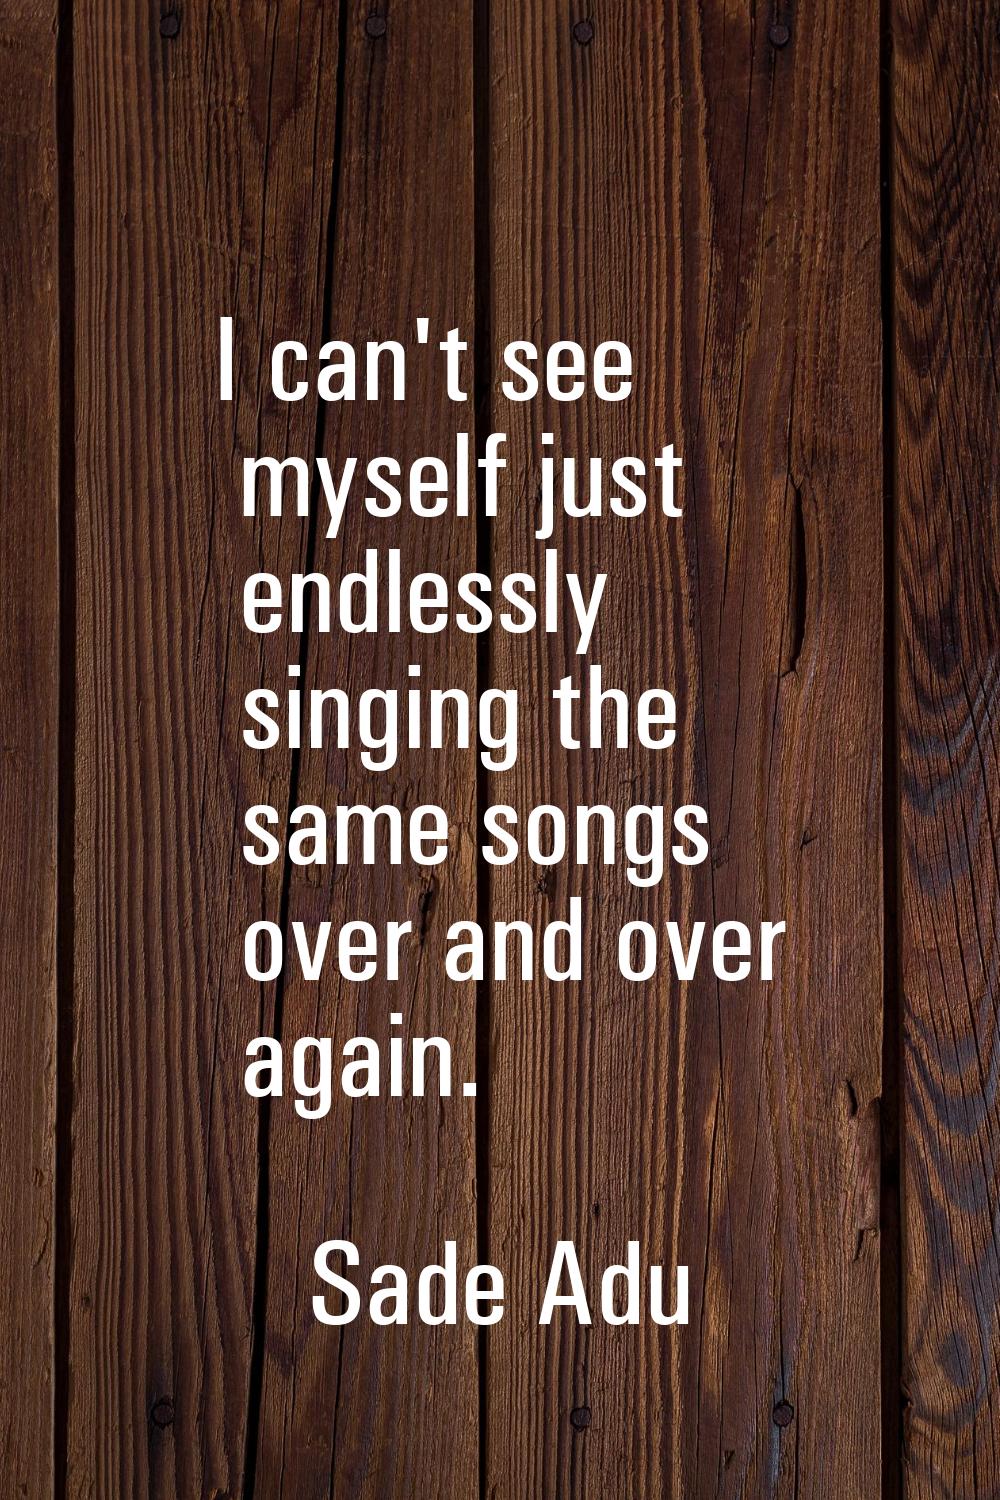 I can't see myself just endlessly singing the same songs over and over again.